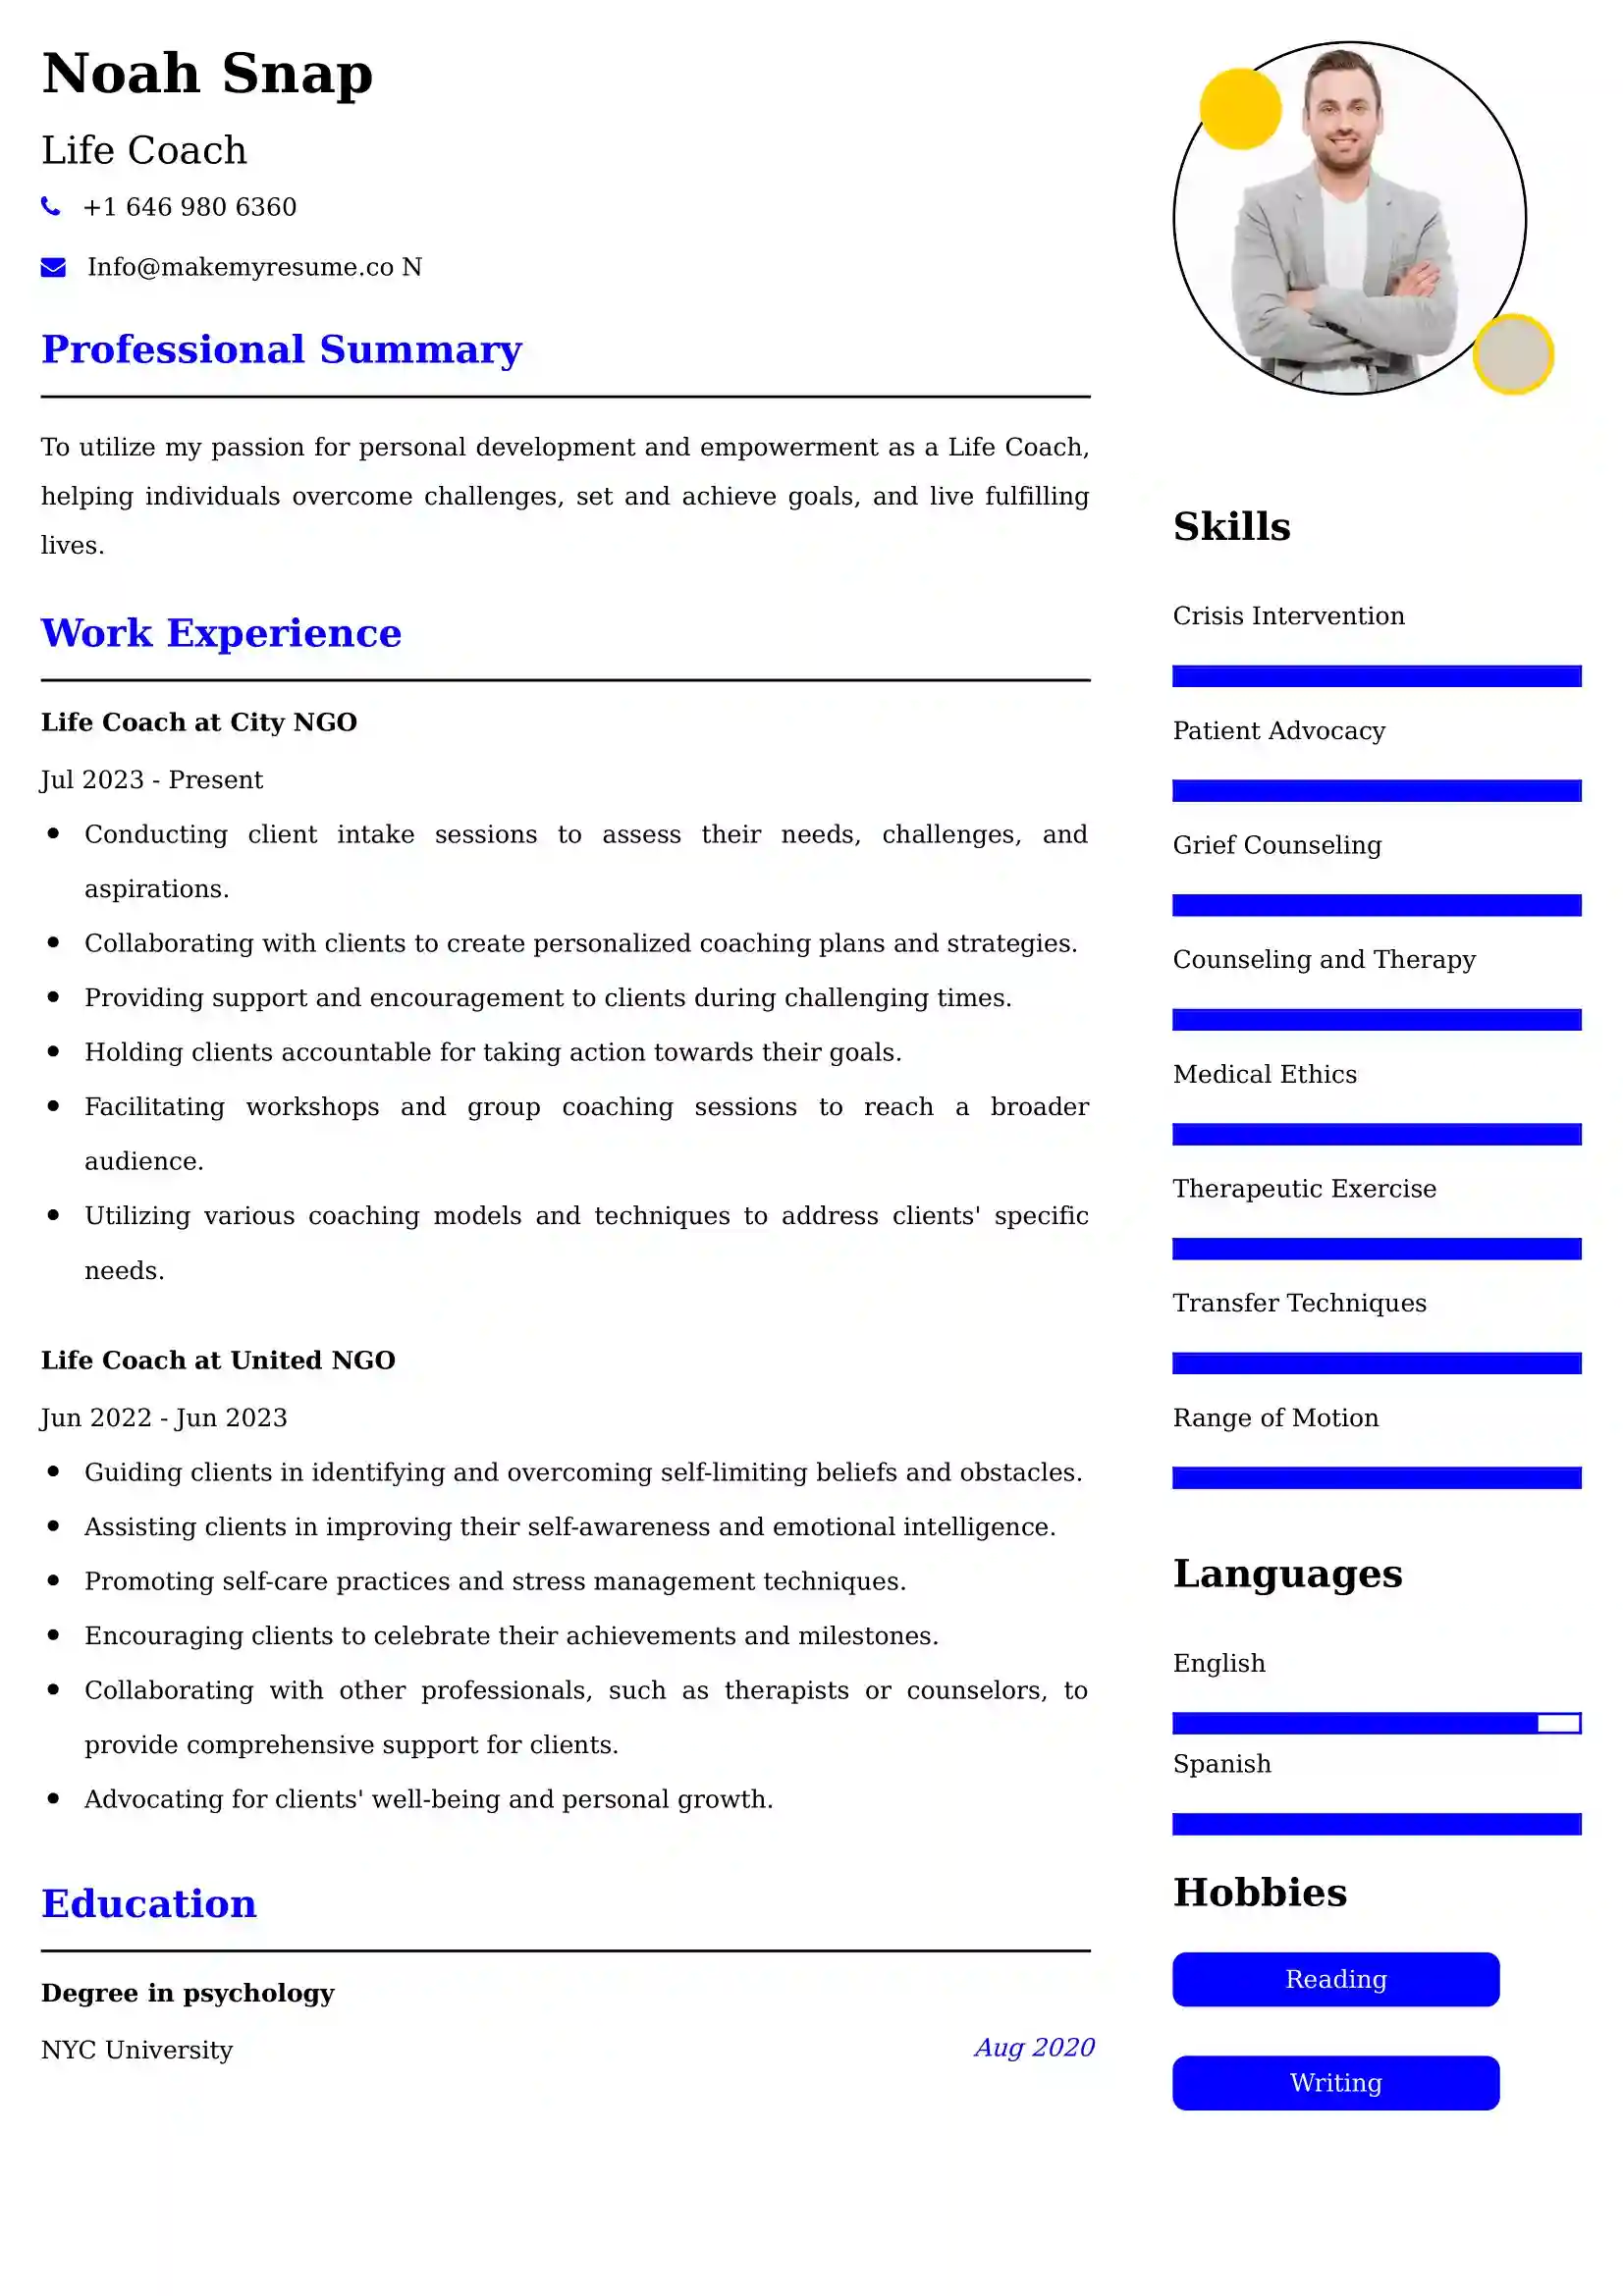 Life Coach Resume Examples - UK Format, Latest Template.